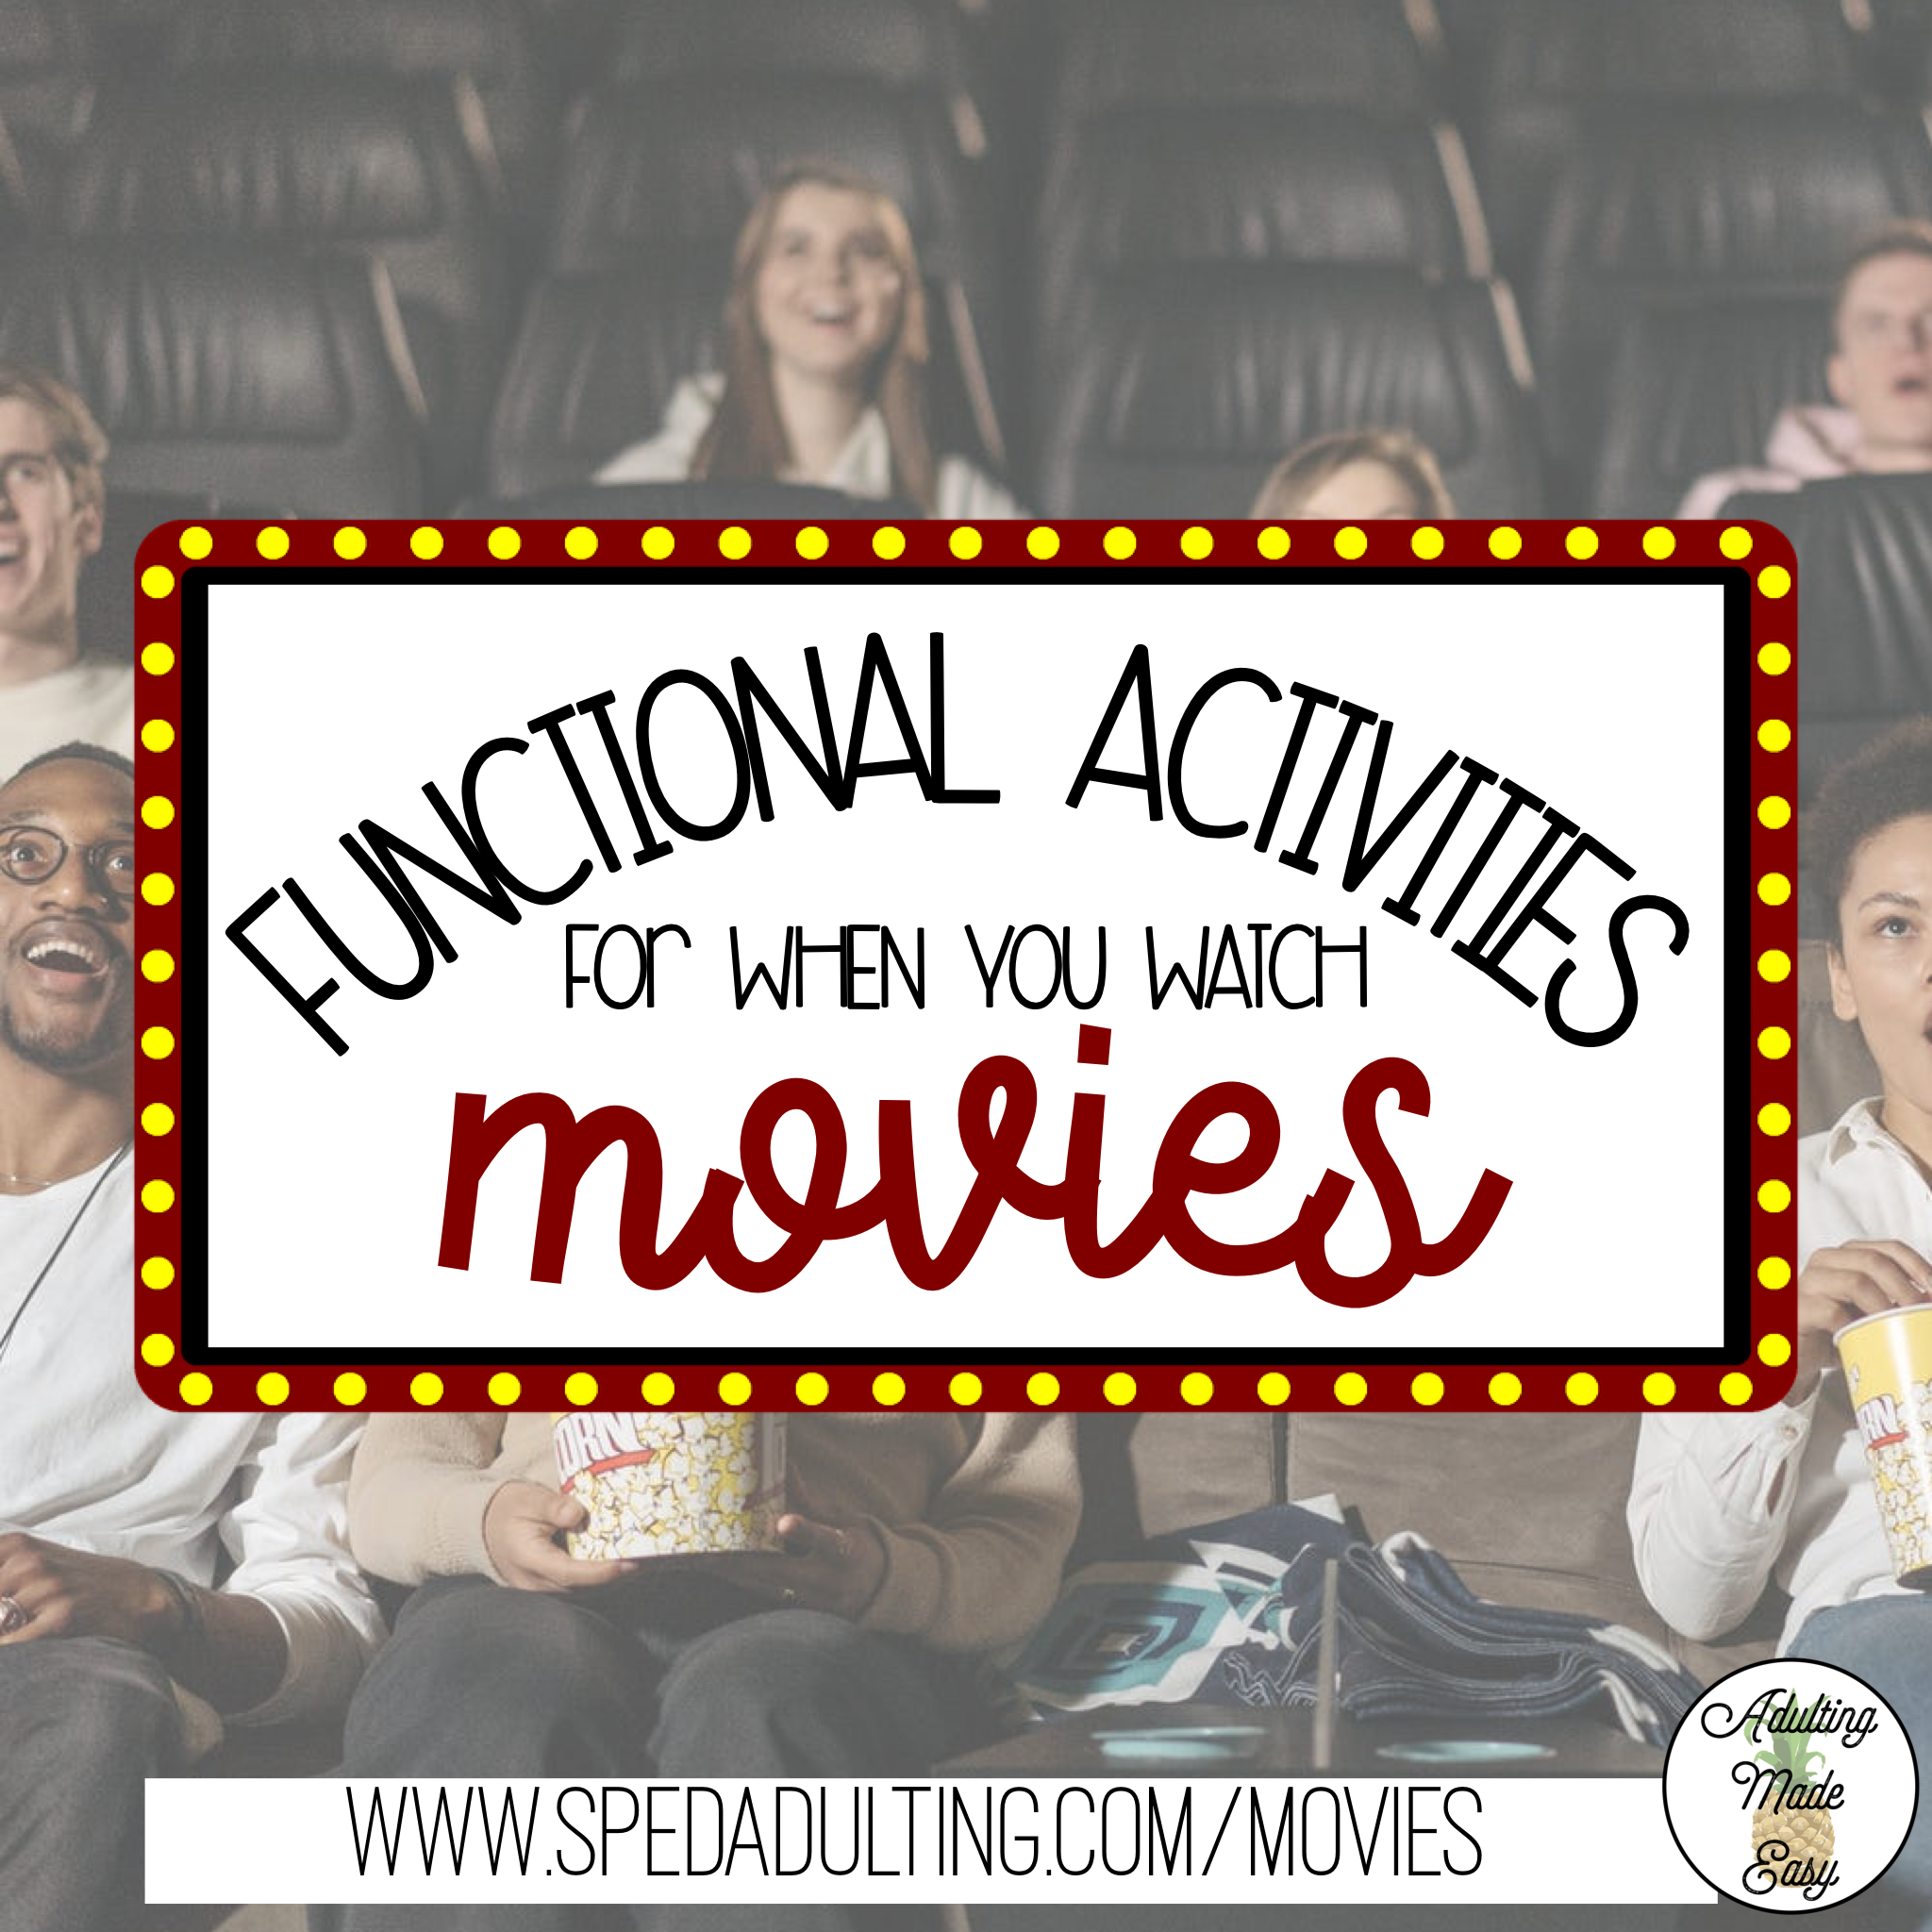 BLOG: Functional activities for when you watch movies in class or on a CBI